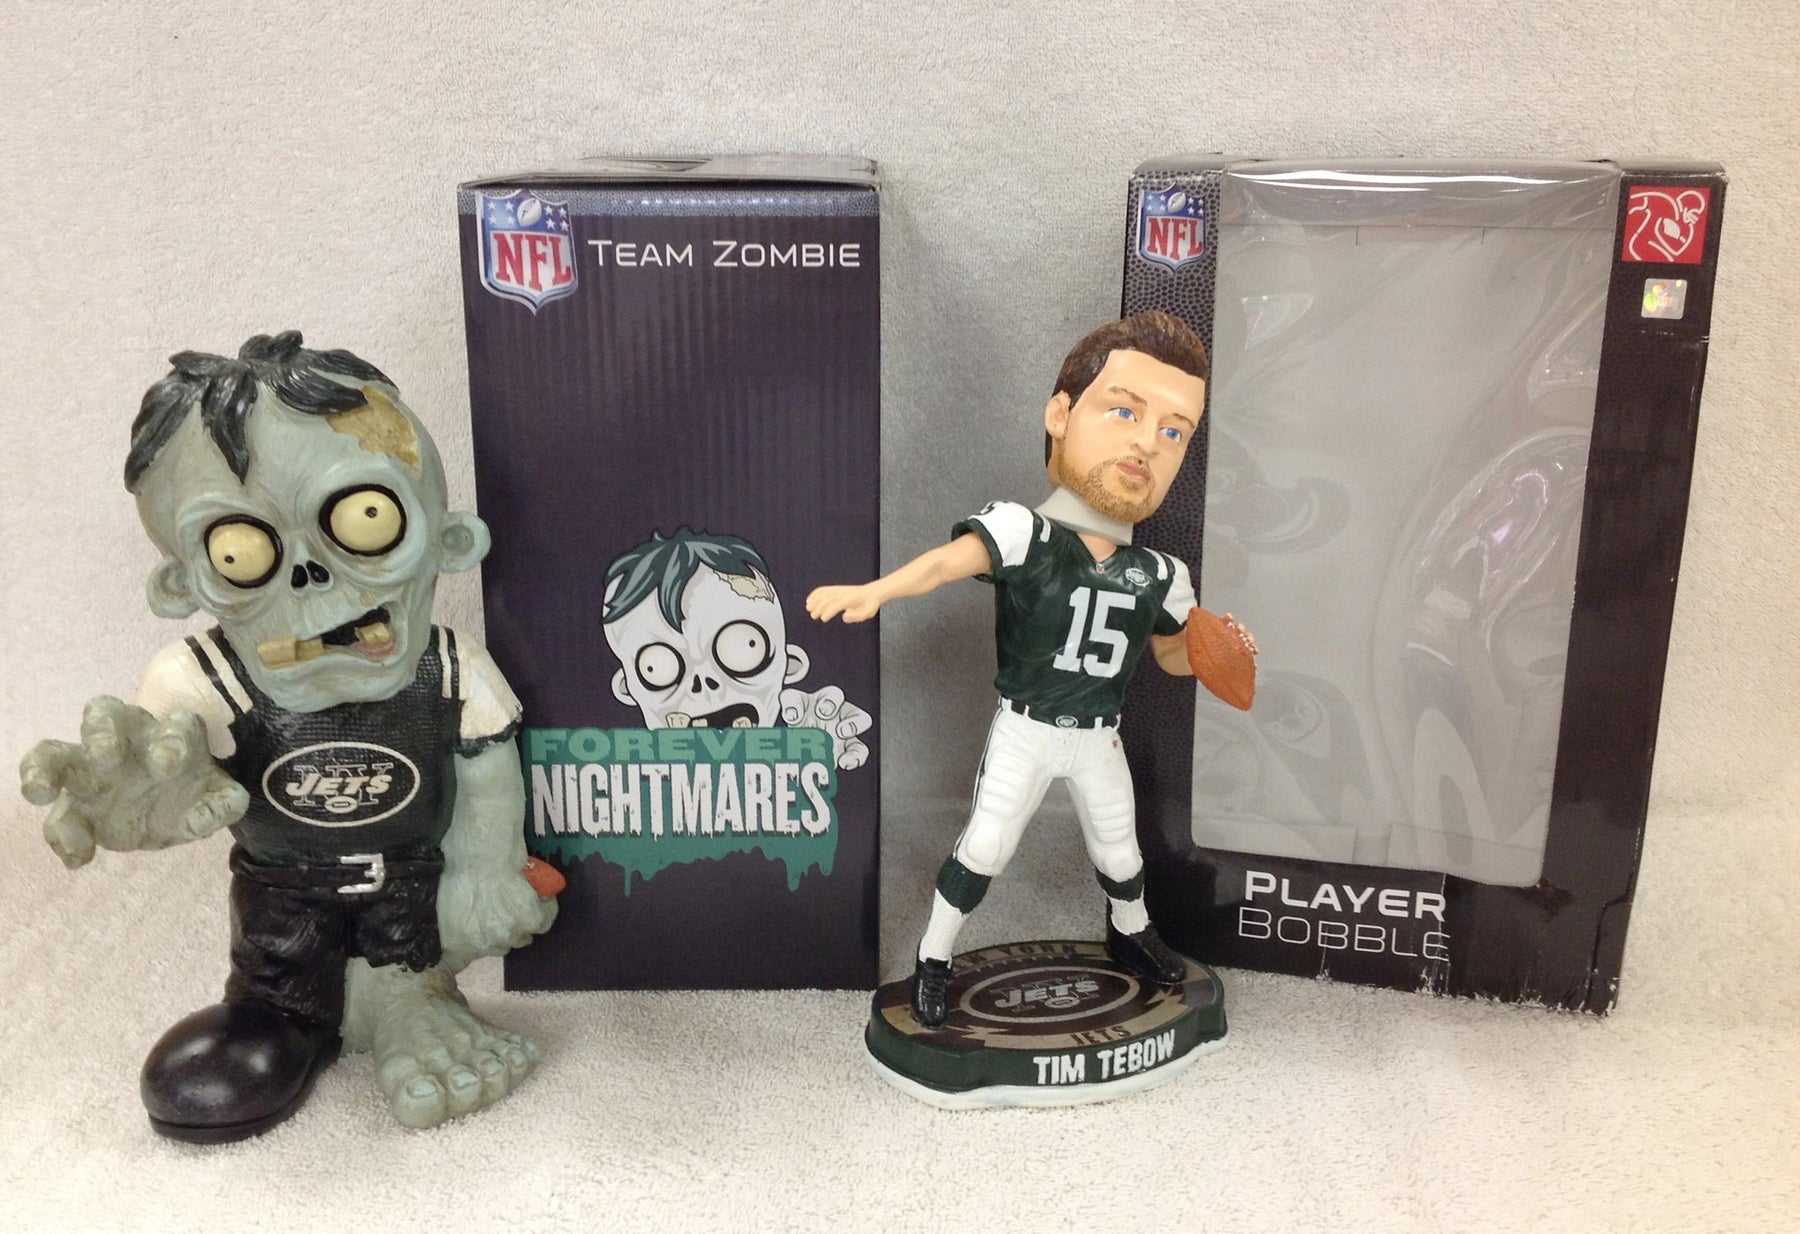 Tim Tebow Bobblehead and New York Jets Zombie - BobblesGalore